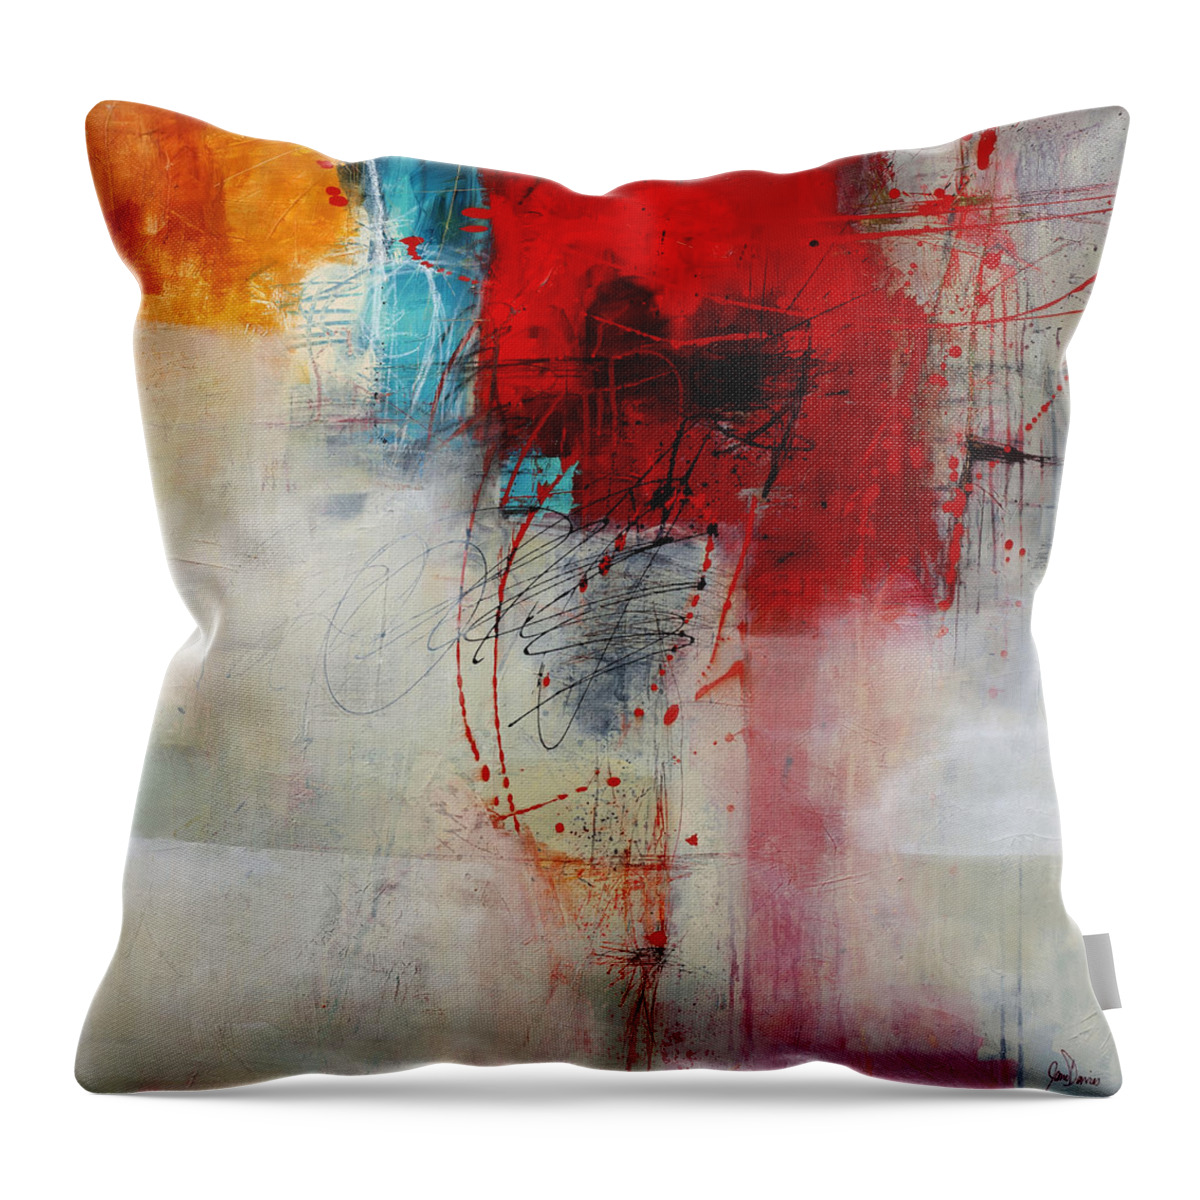 Abstract Art Throw Pillow featuring the painting Red Splash 1 by Jane Davies